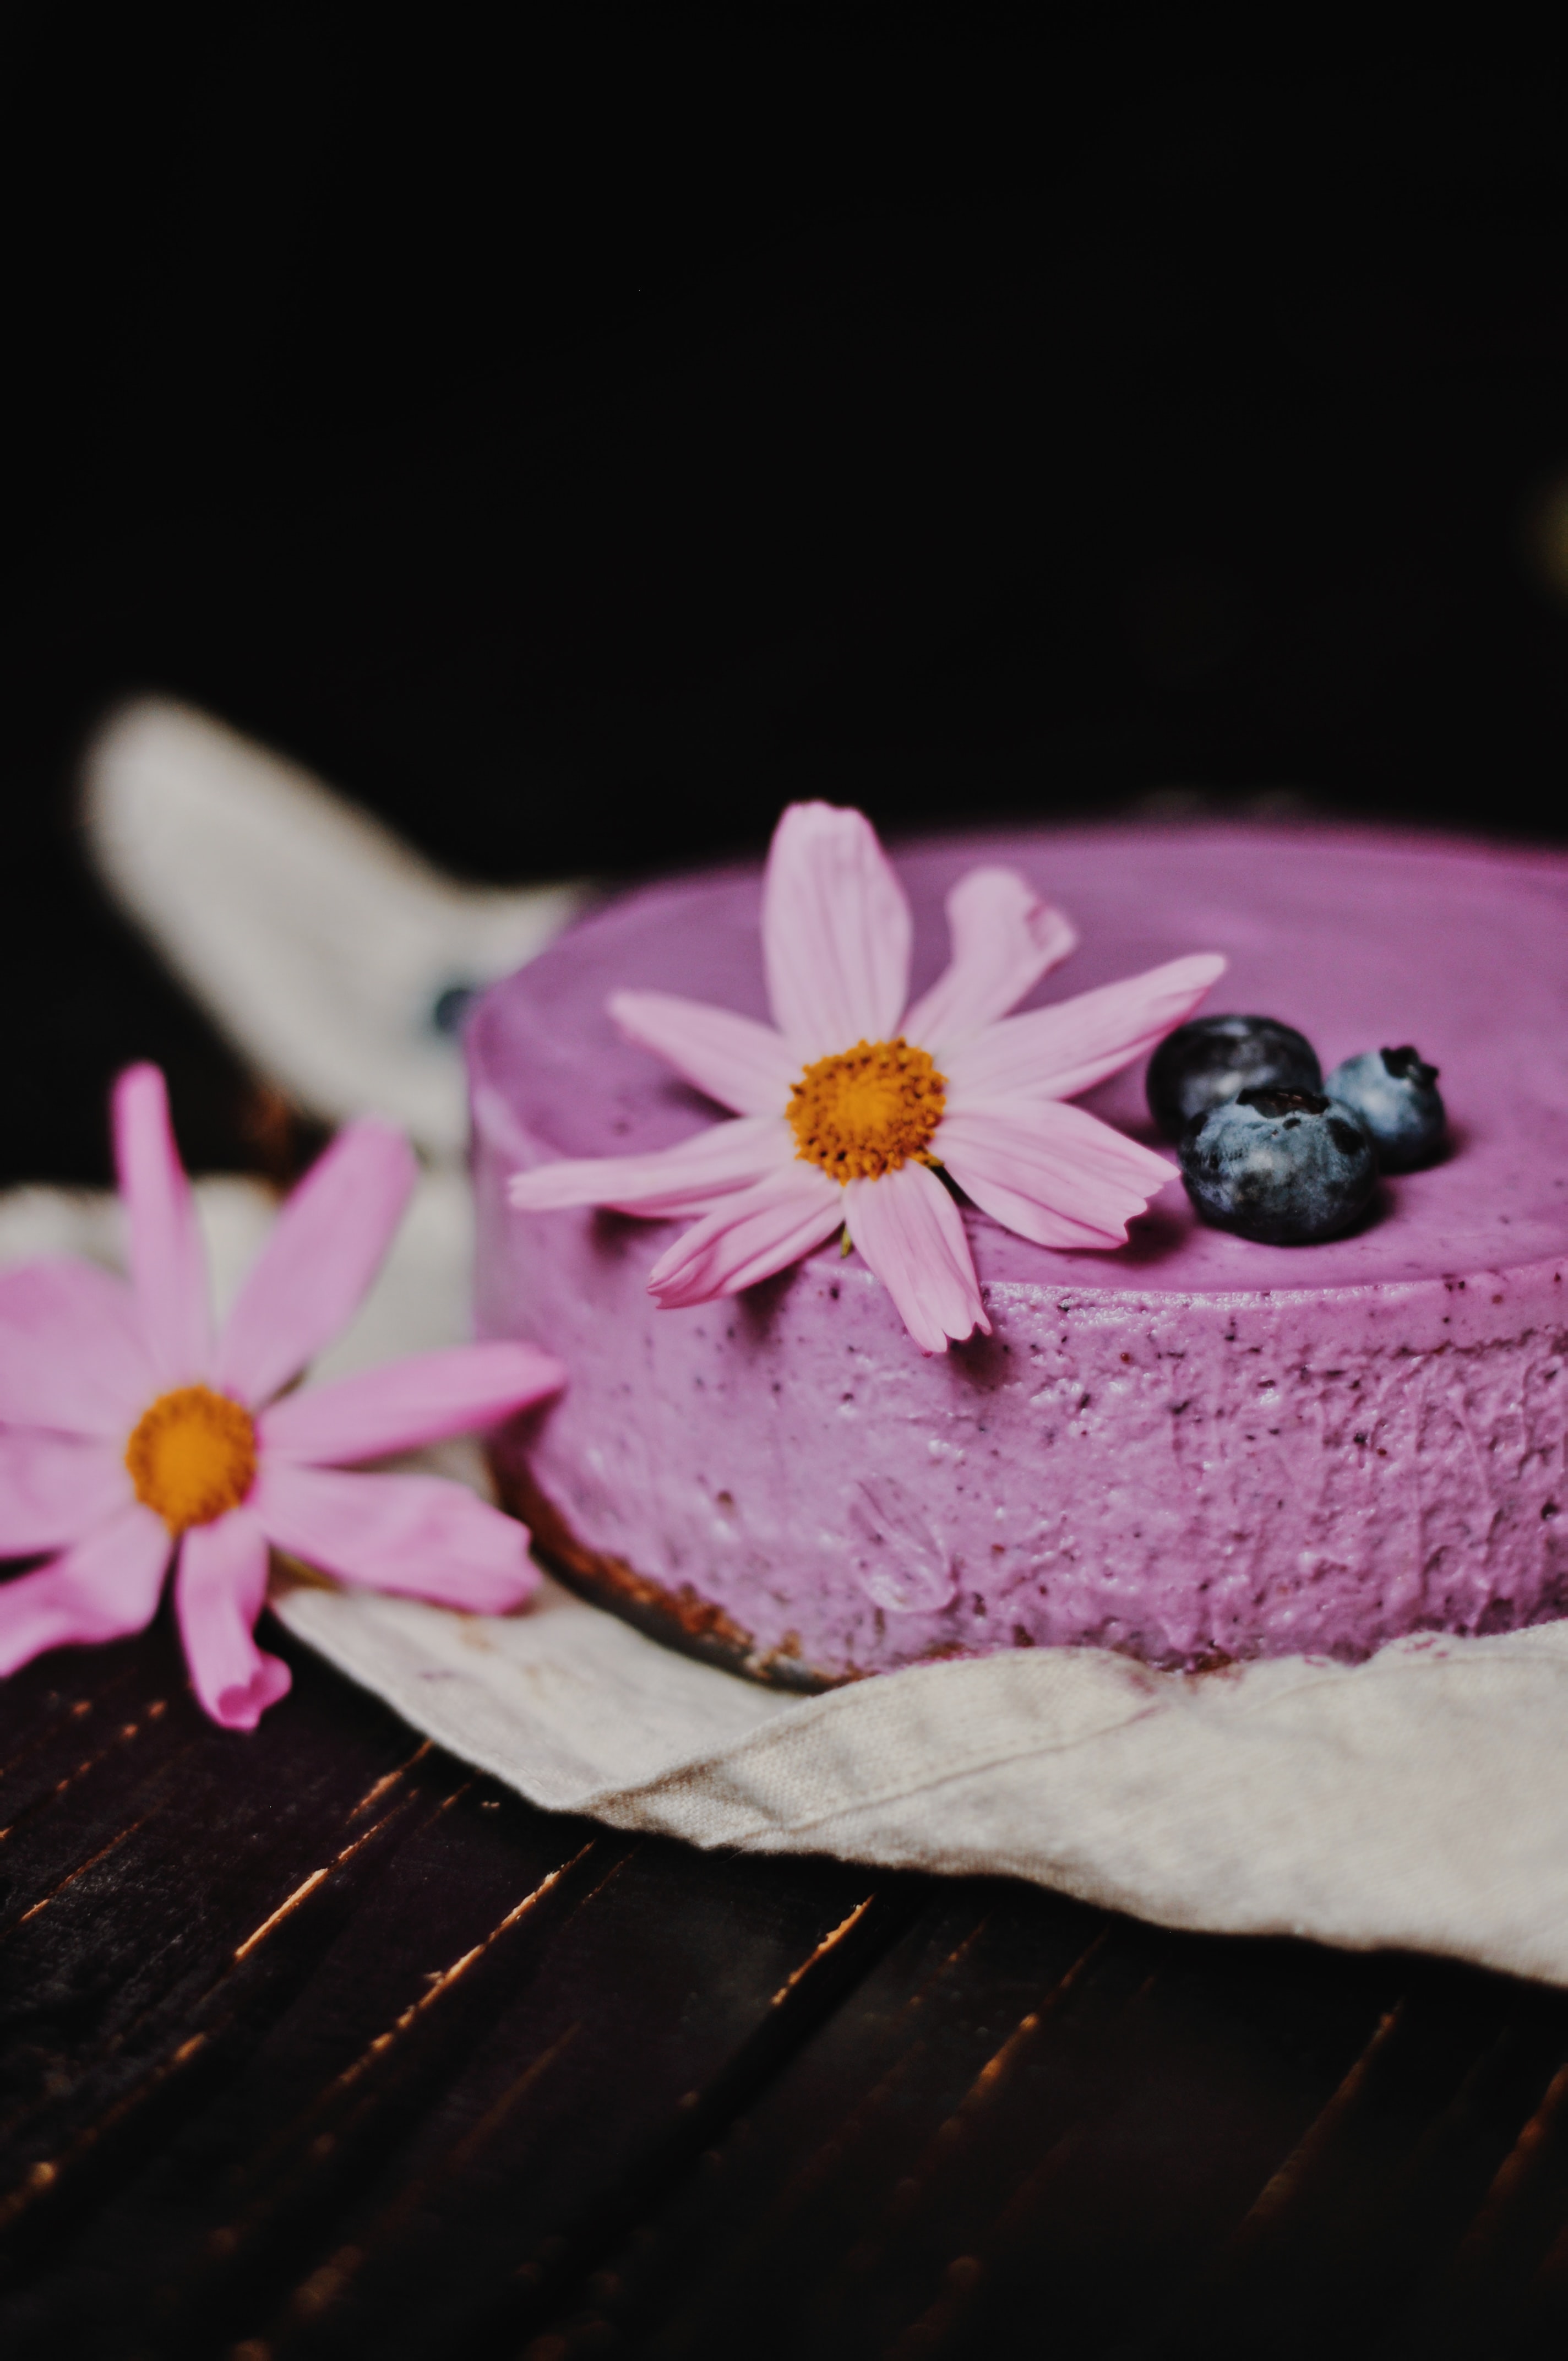 Download mobile wallpaper Bakery Products, Cheesecake, Food, Bilberries, Pie, Flowers, Baking for free.